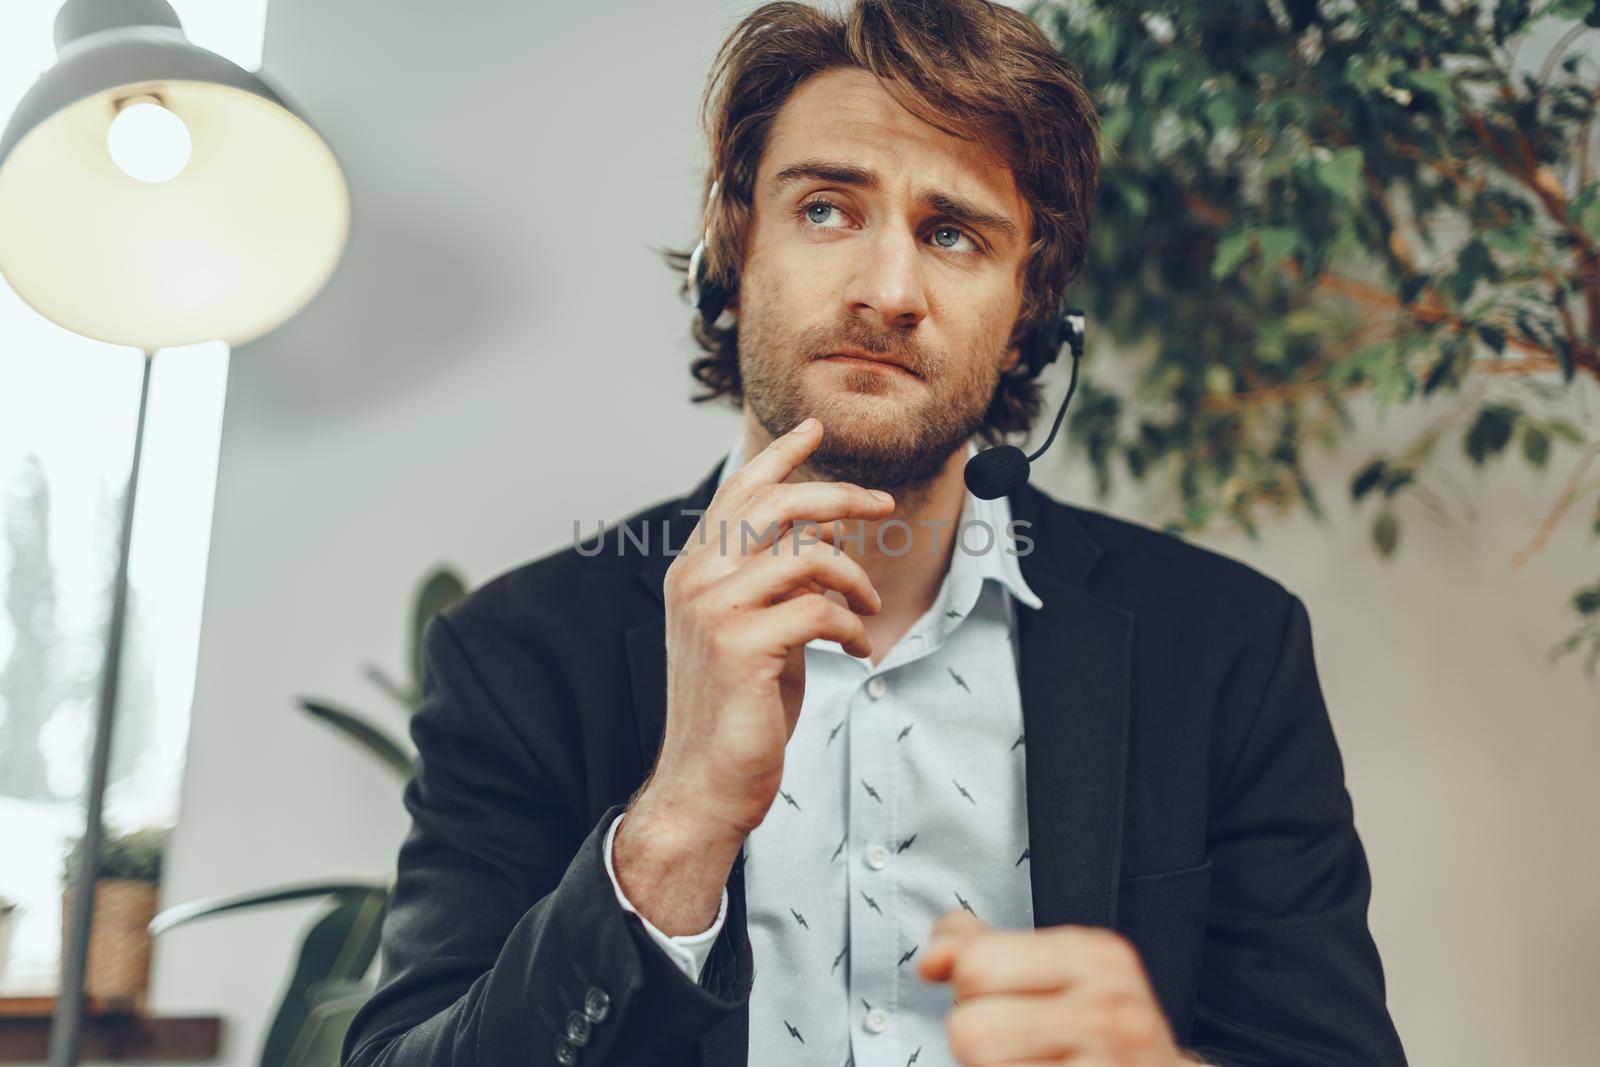 Close up portrait of an angry businessman with headset having stressful annoying online conversation